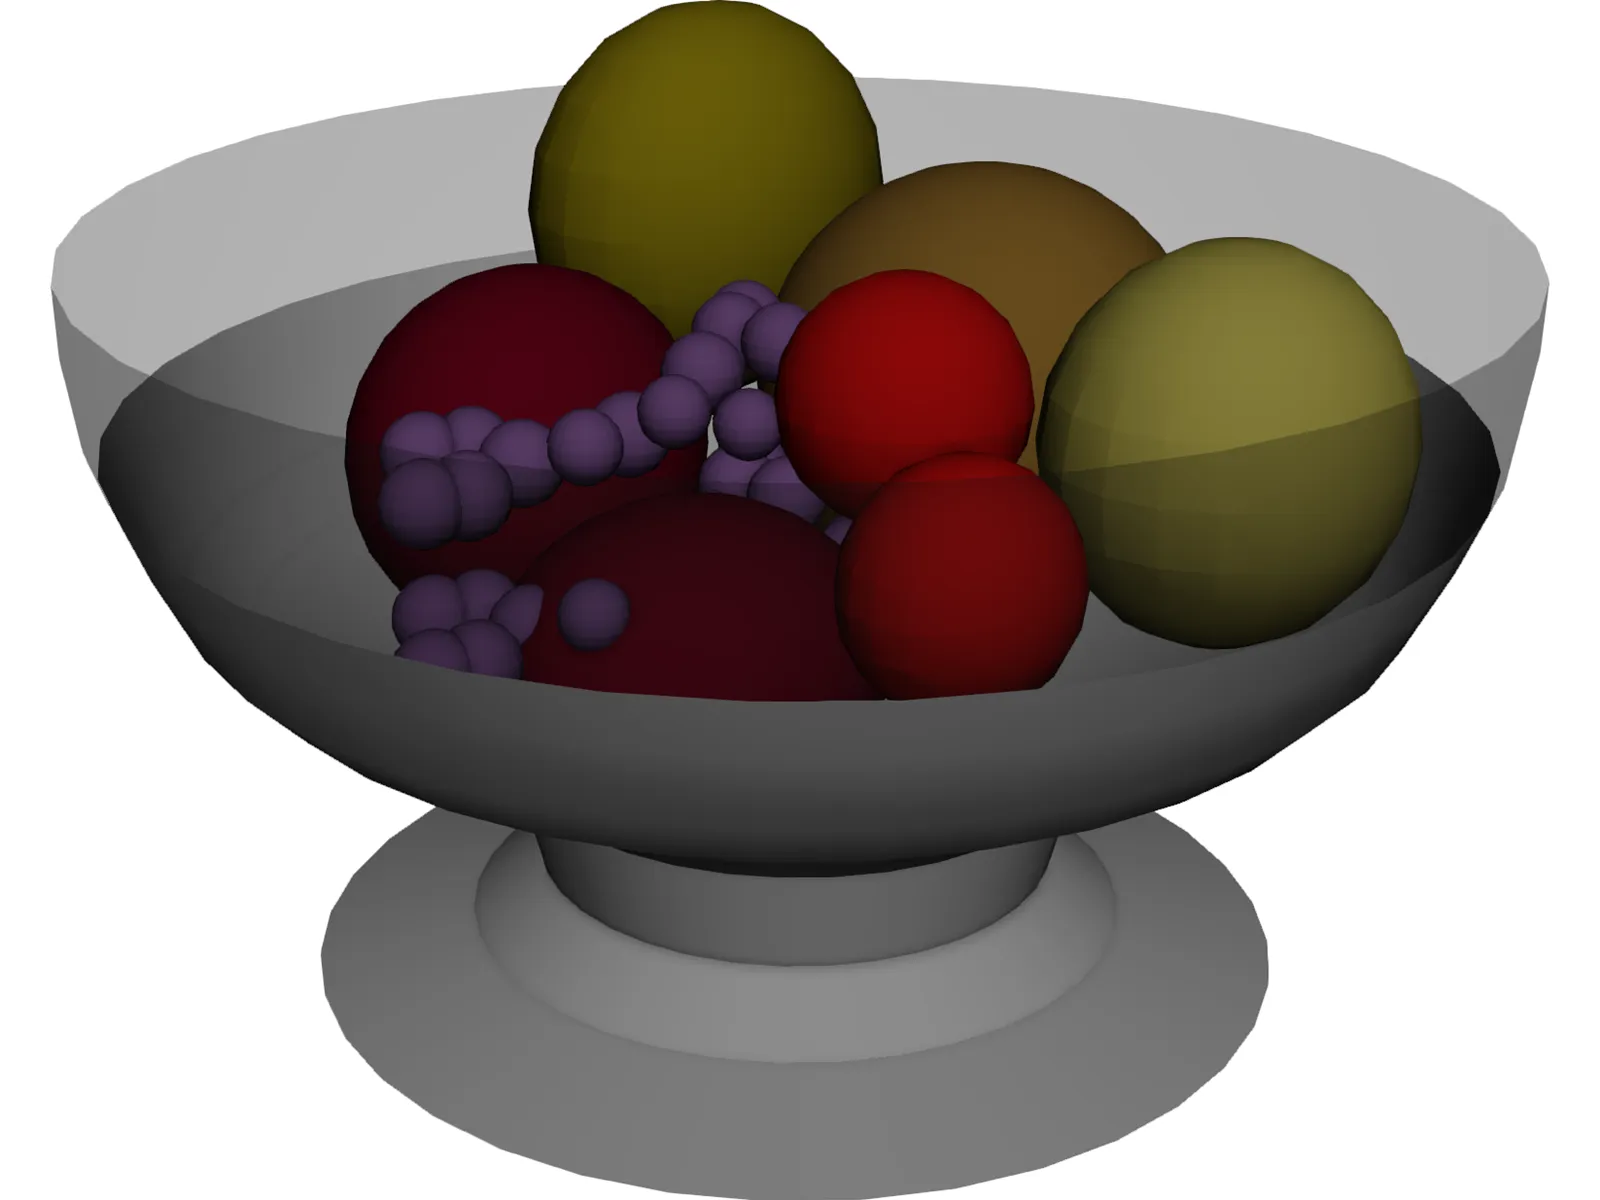 Fruits On Plate 3D Model